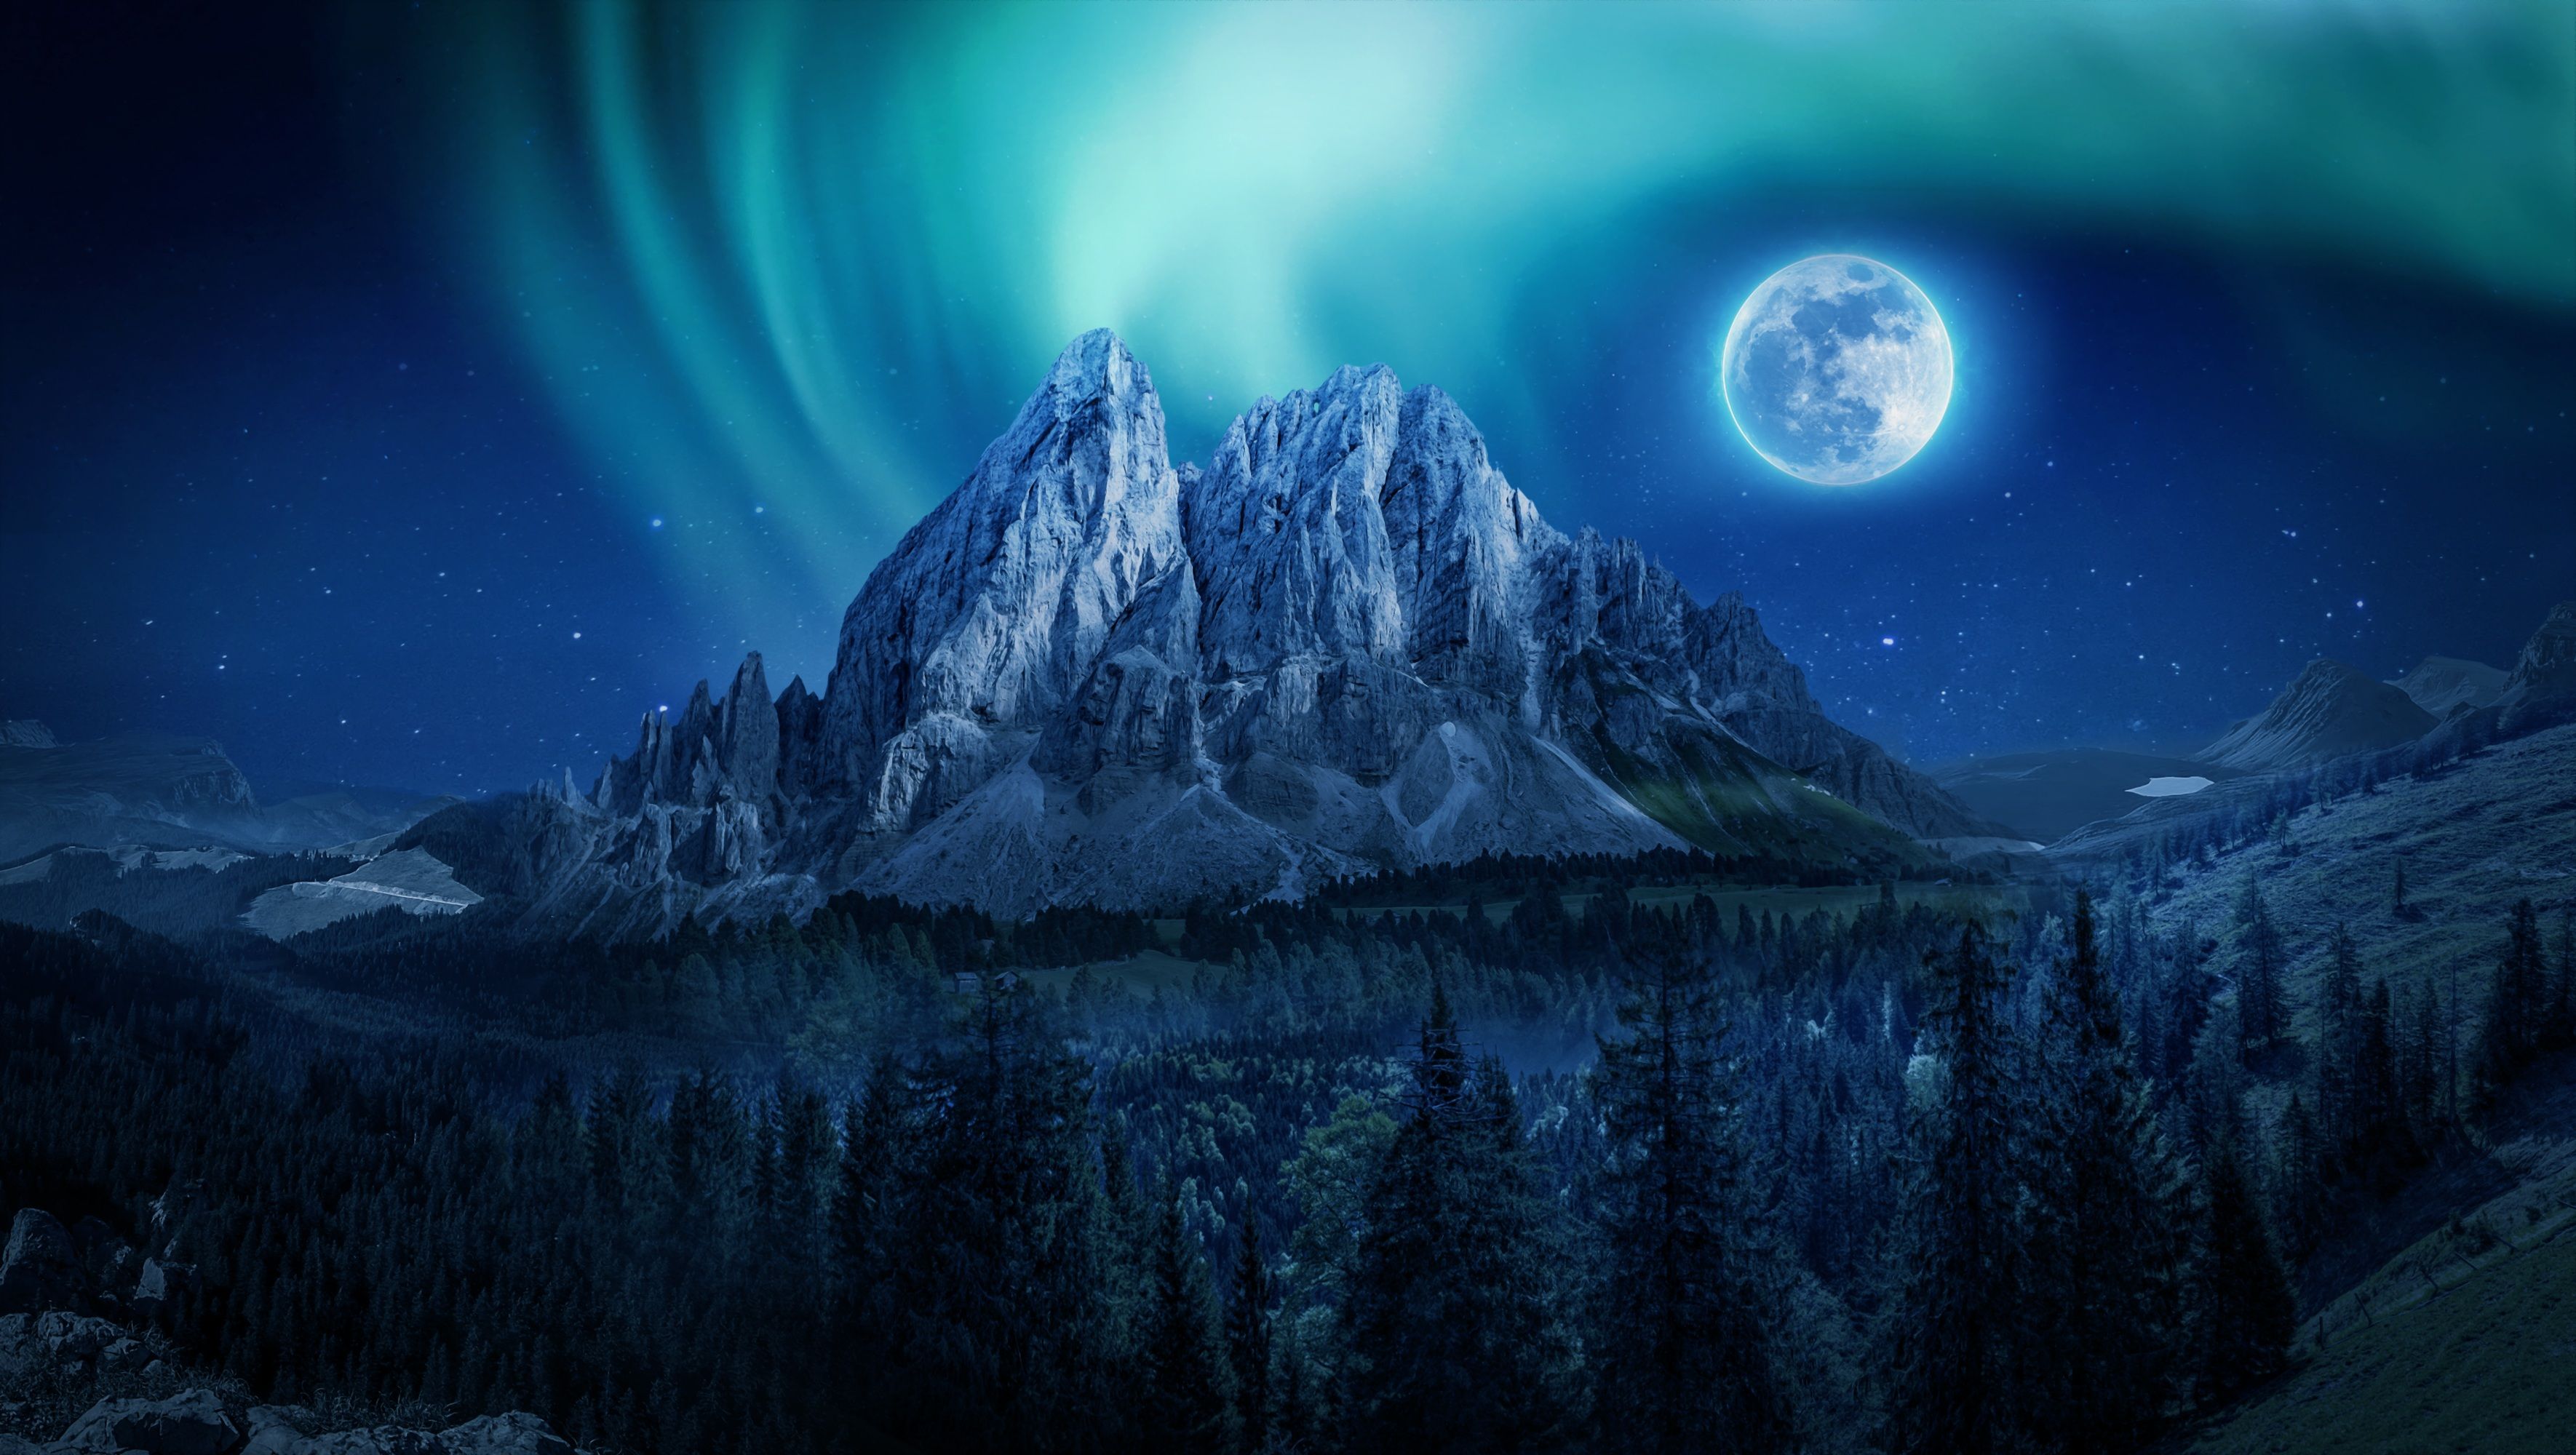 Wallpaper Northern Lights, Aurora Borealis, Mountain, Moon, Forest, 4K, Nature,. Wallpaper for iPhone, Android, Mobile and Desktop